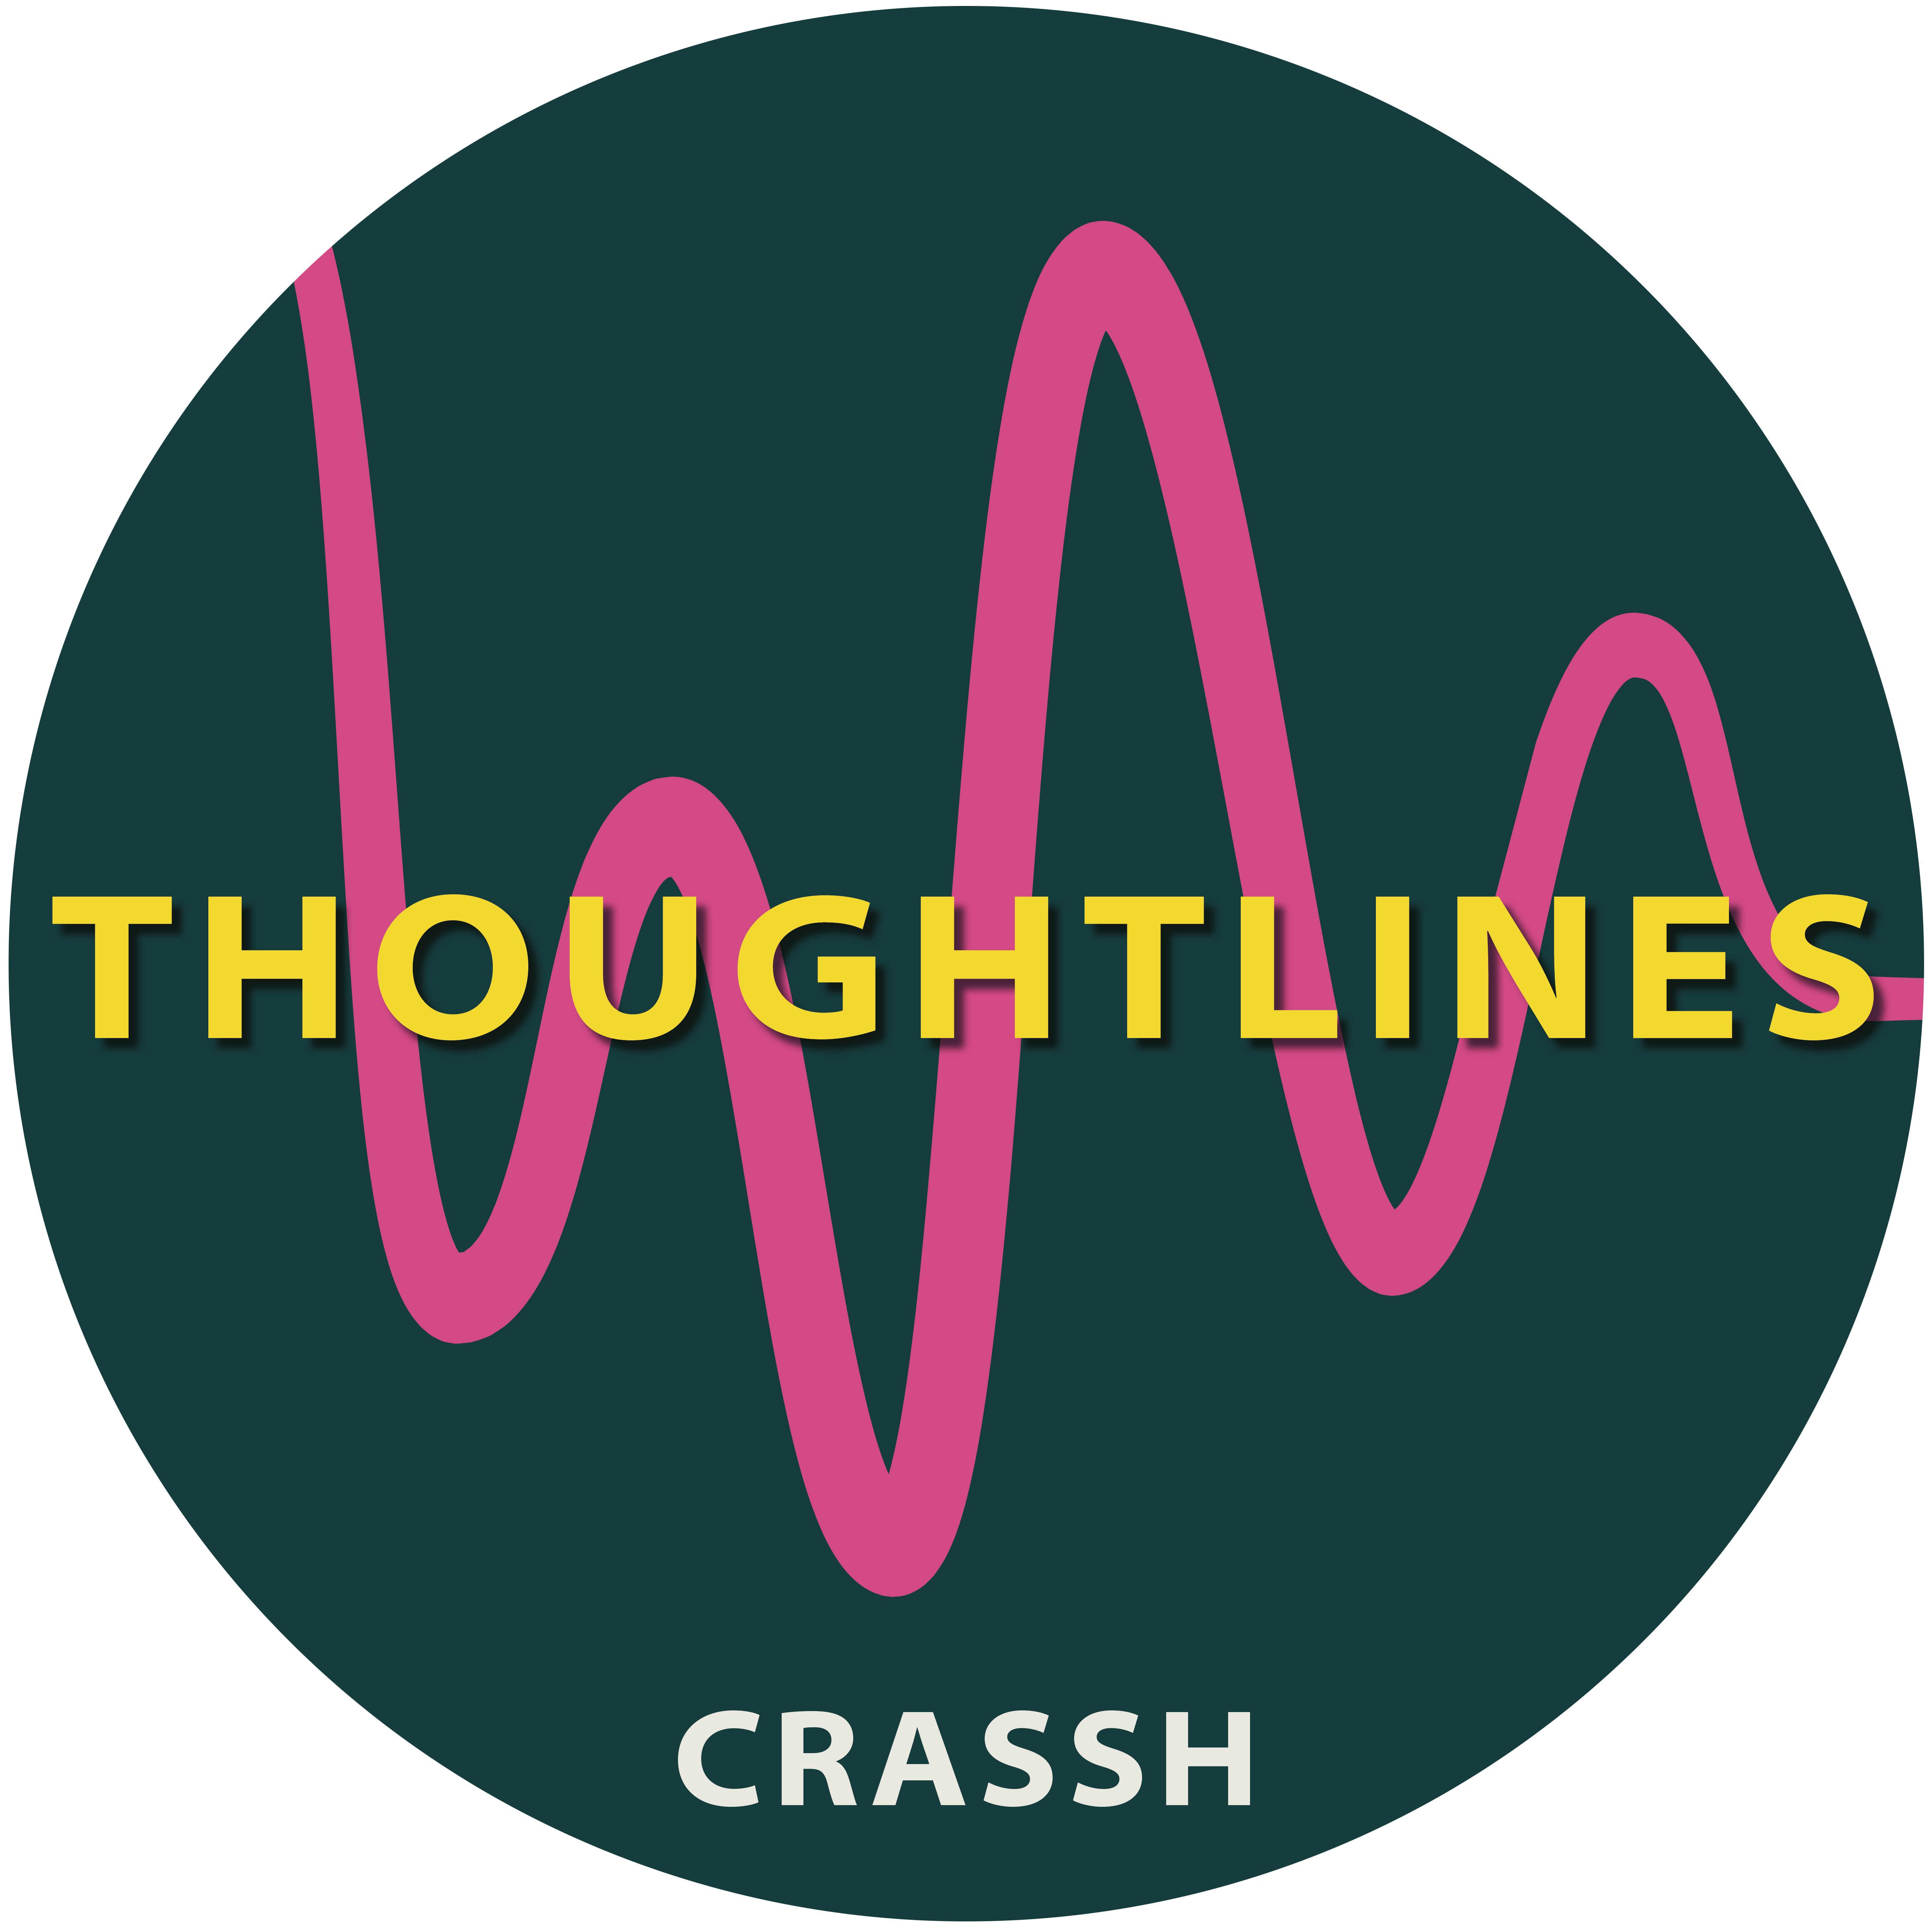 Thoughtlines